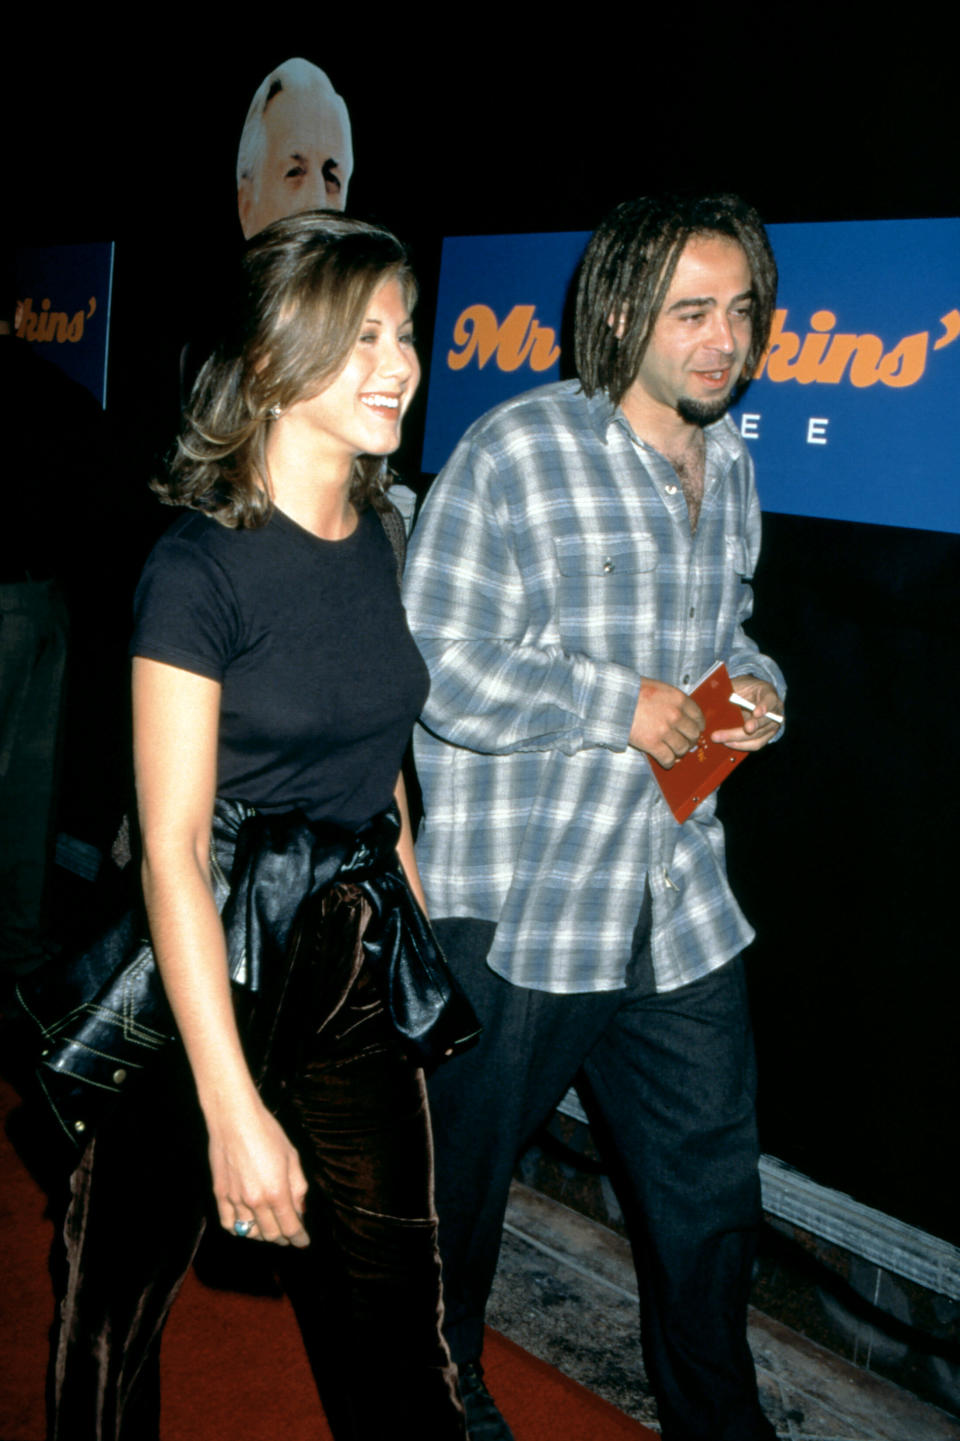 Adam Duritz and Jennifer Aniston met at the famed Viper Room. (Photo: Ron Davis/Getty Images)